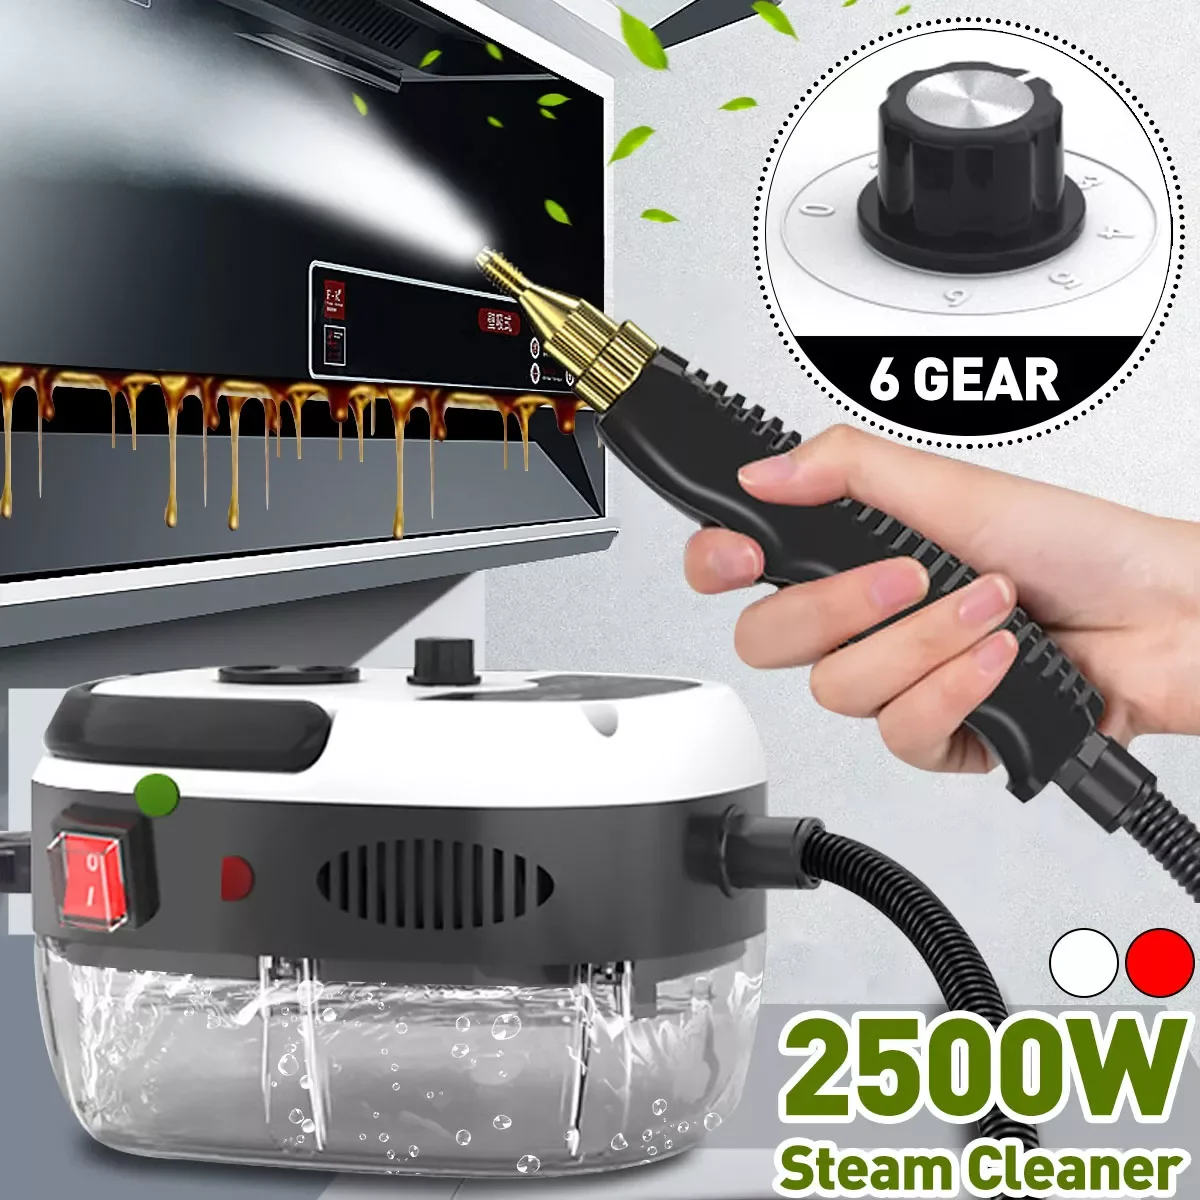 

2500W 220V High Pressure High Temperature Household Steam Cleaners Handhled Air Conditioning Kitchen Hood Car Steaming Cleaner